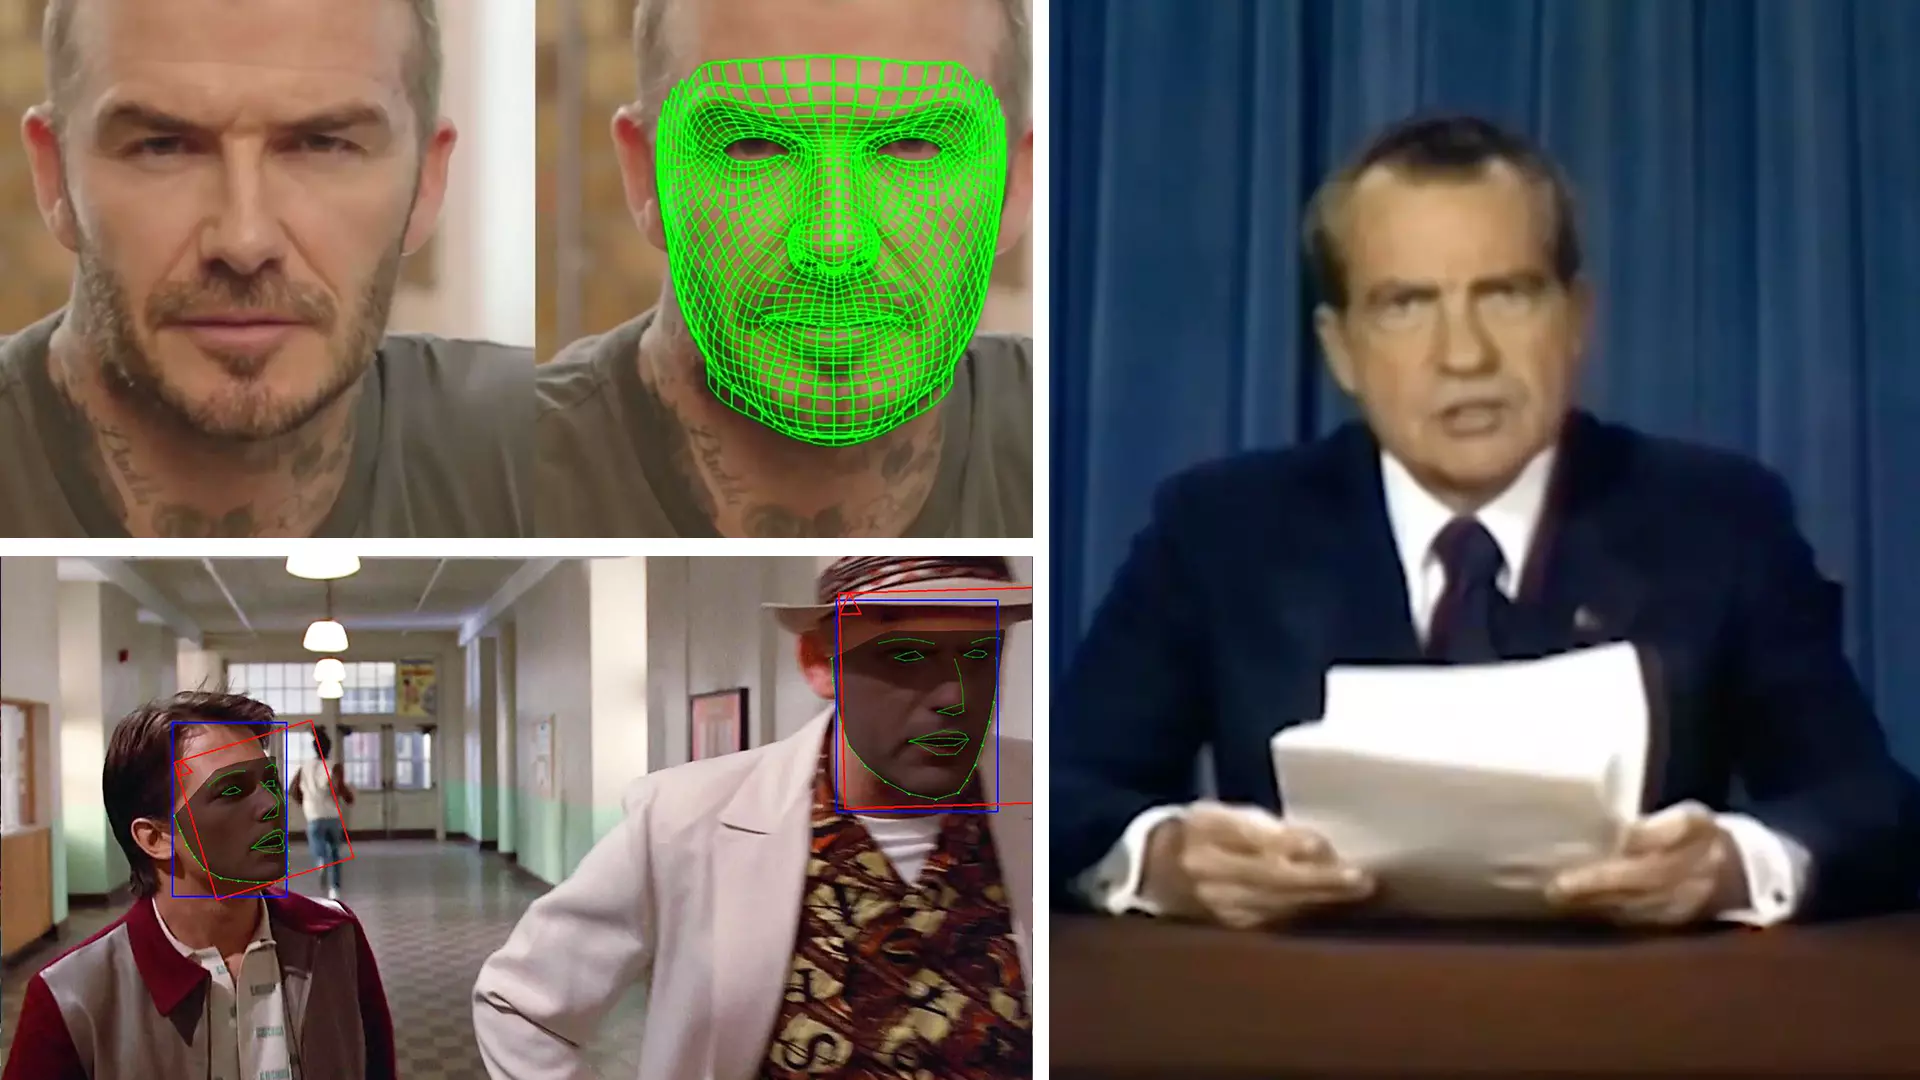 3 Ways In Which Deepfakes Can Be Used Positively